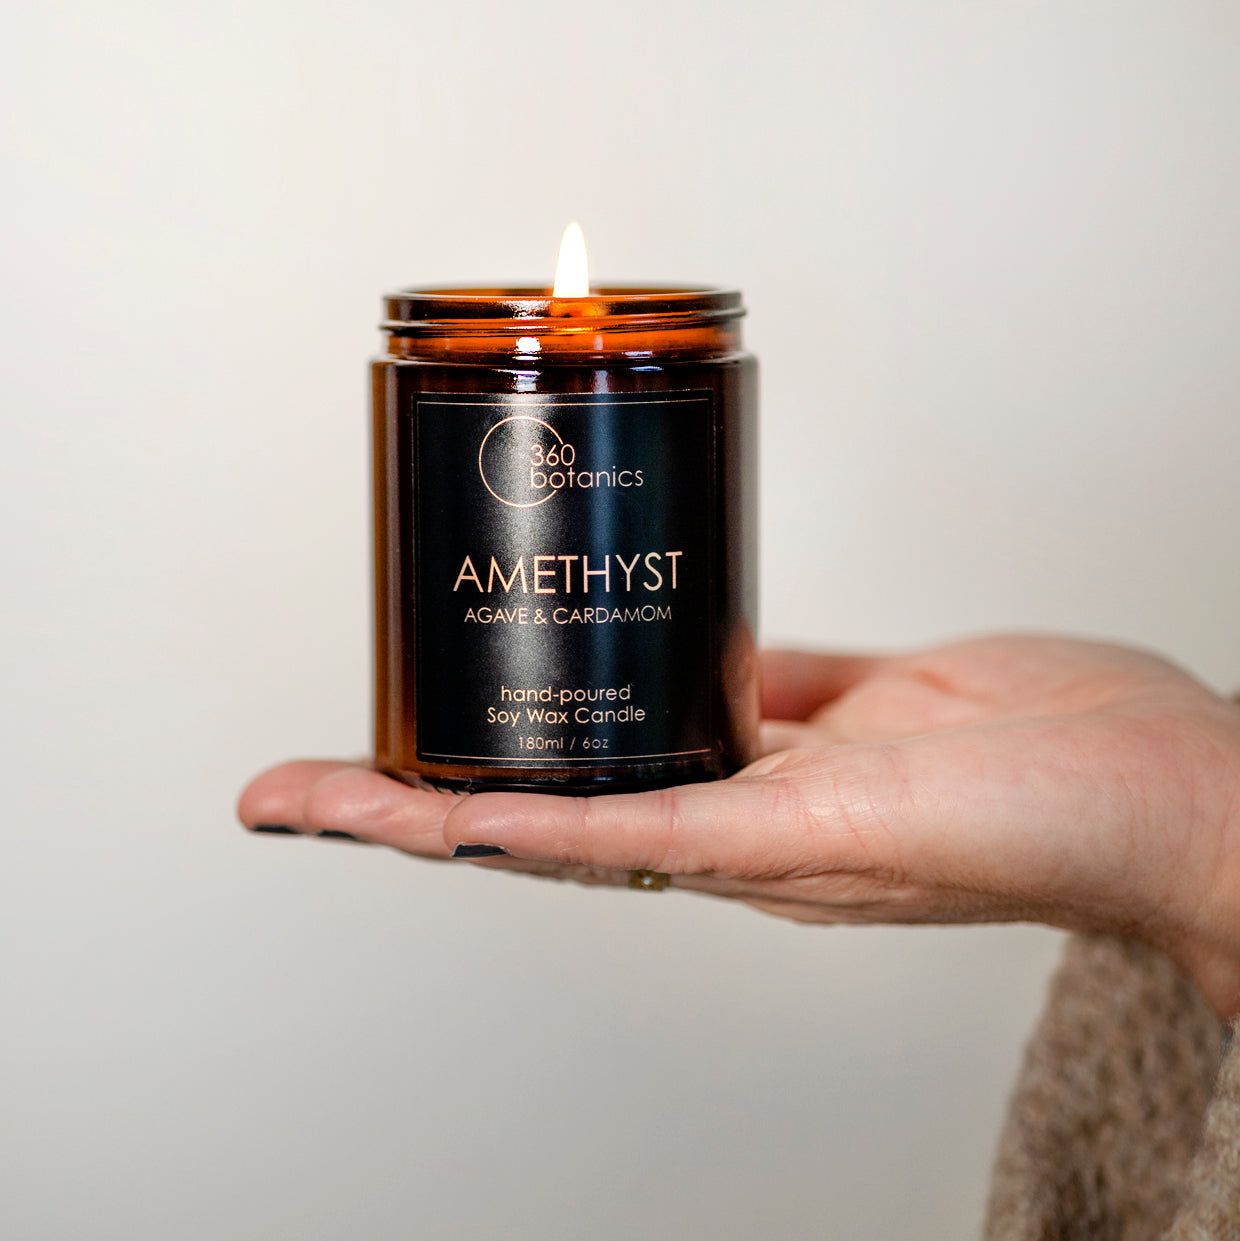  A hand holding a lit Amethyst Agave & Cardamom' scented soy wax candle by 360 Botanics, which is hand-poured into a brown glass jar.